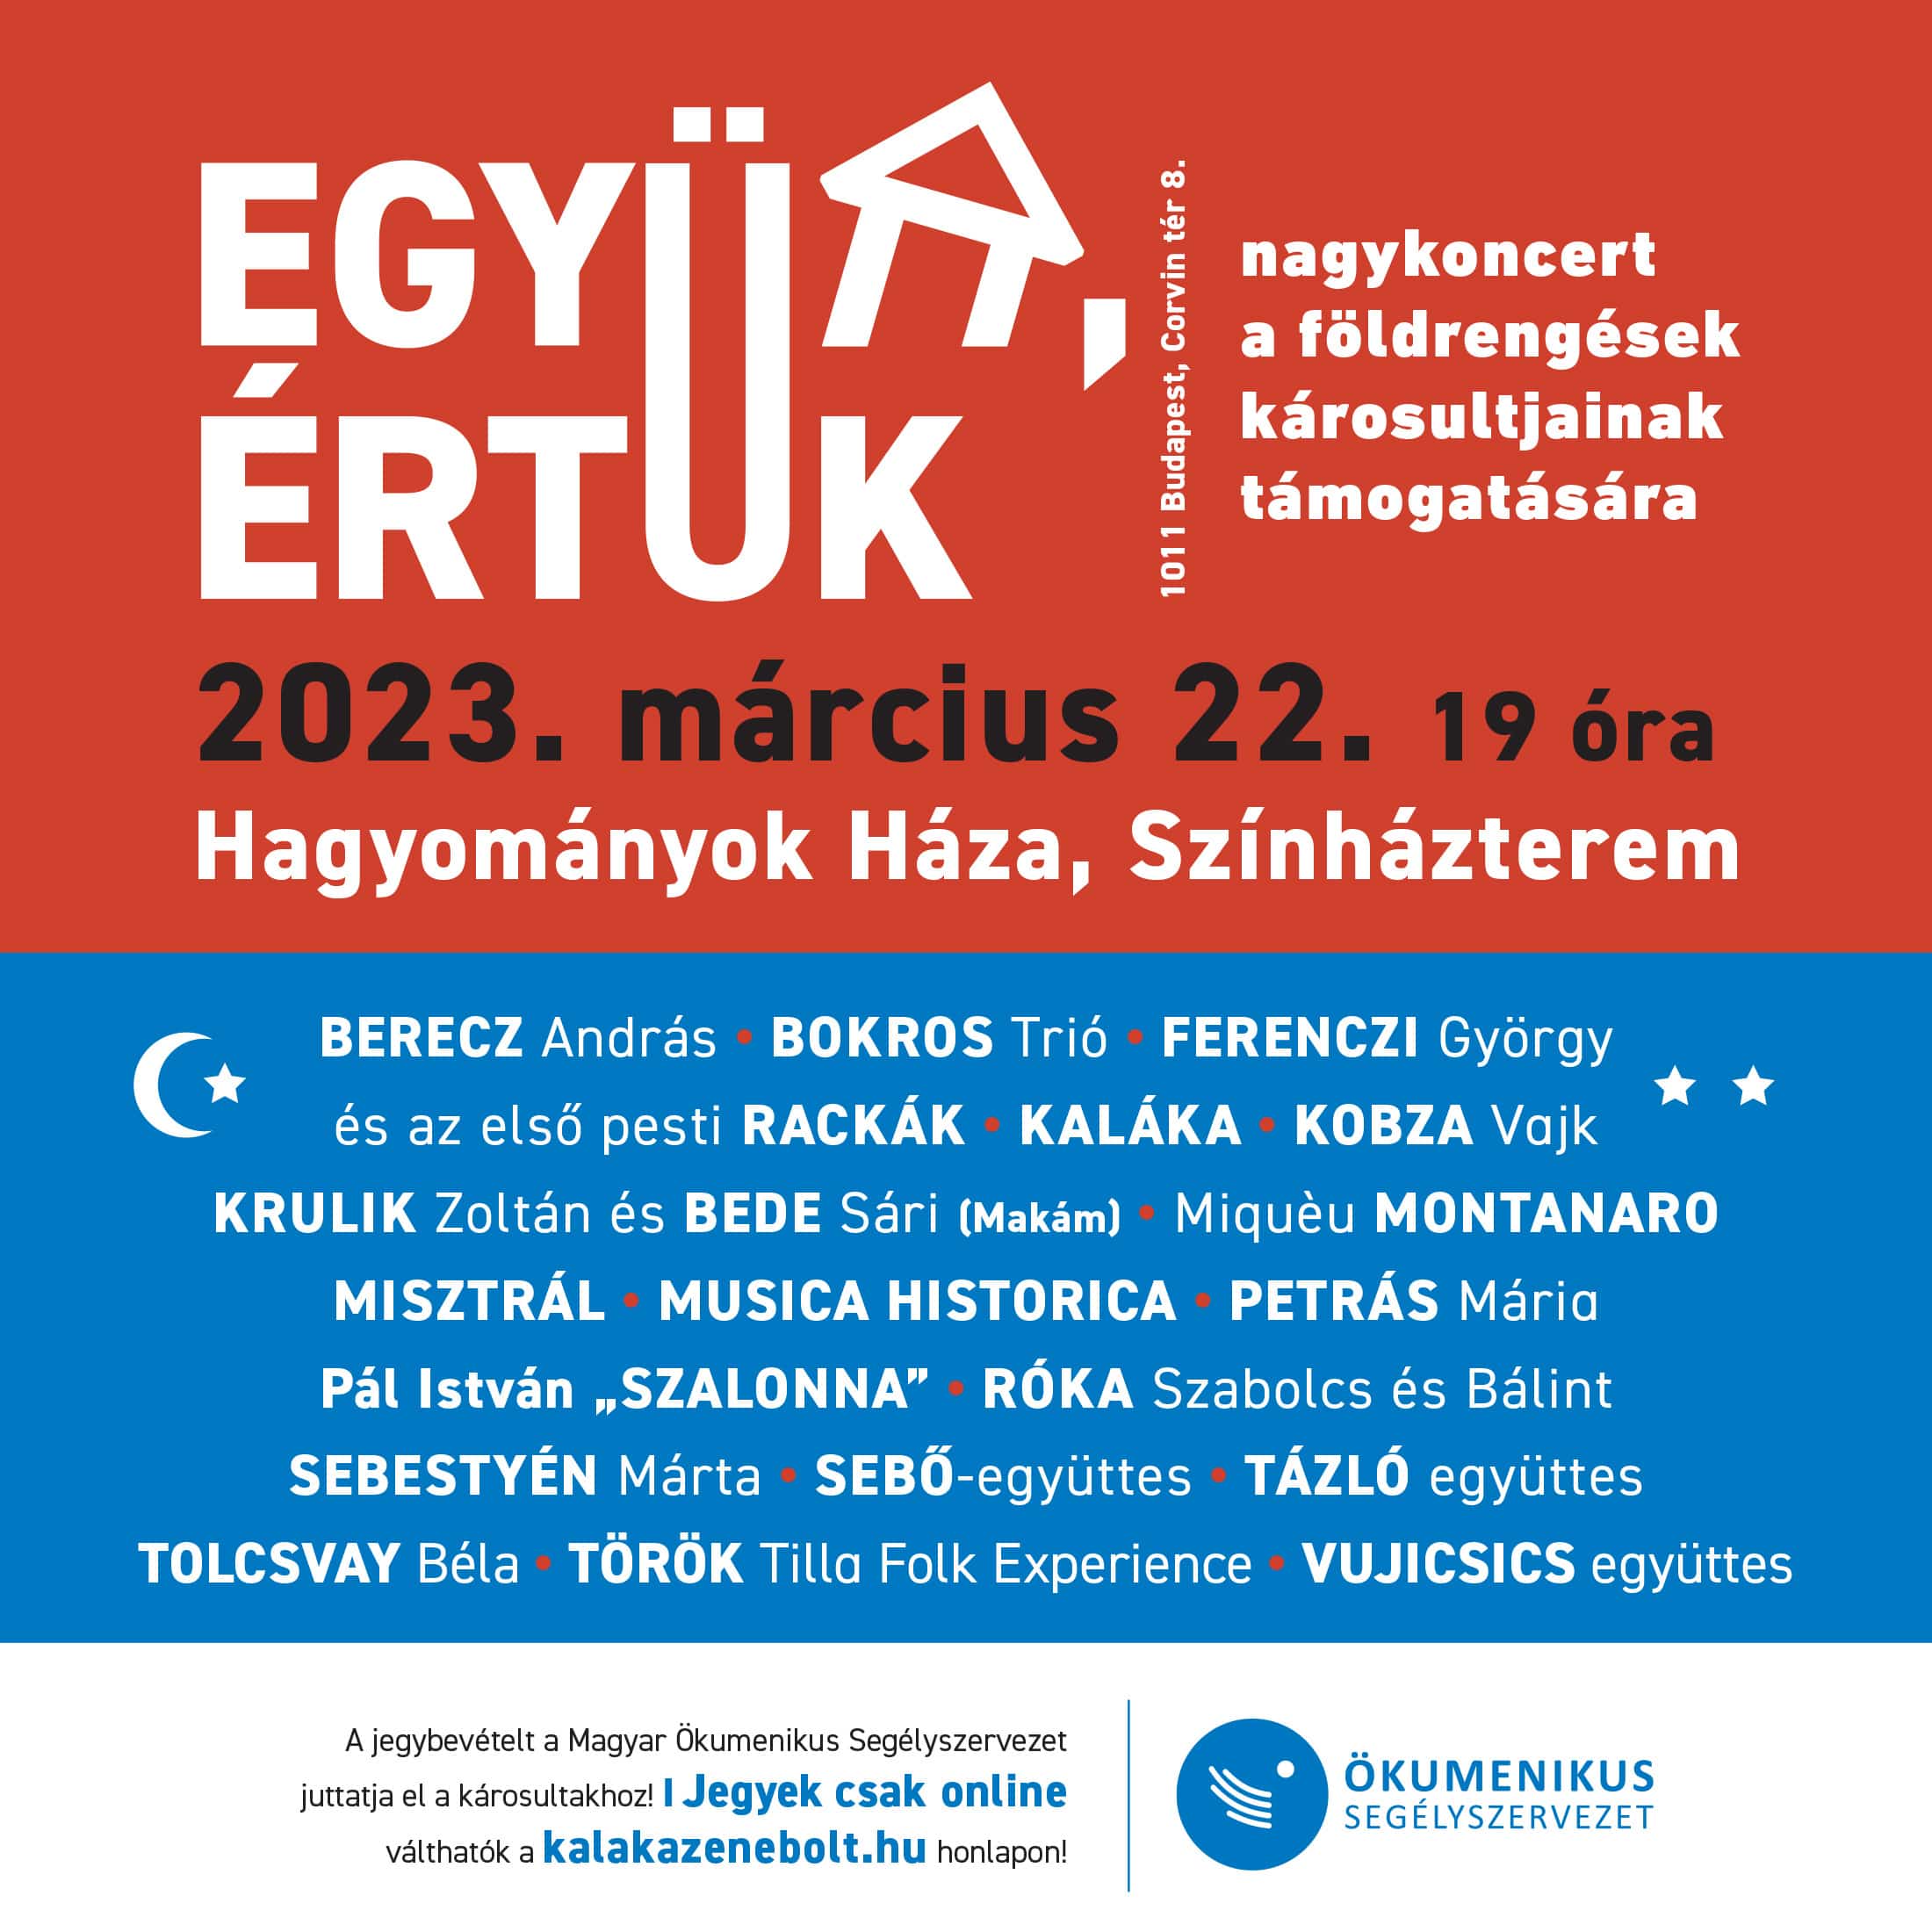 Big Charity Concert Soon in Budapest to Support Turkey-Syria Earthquake Victims